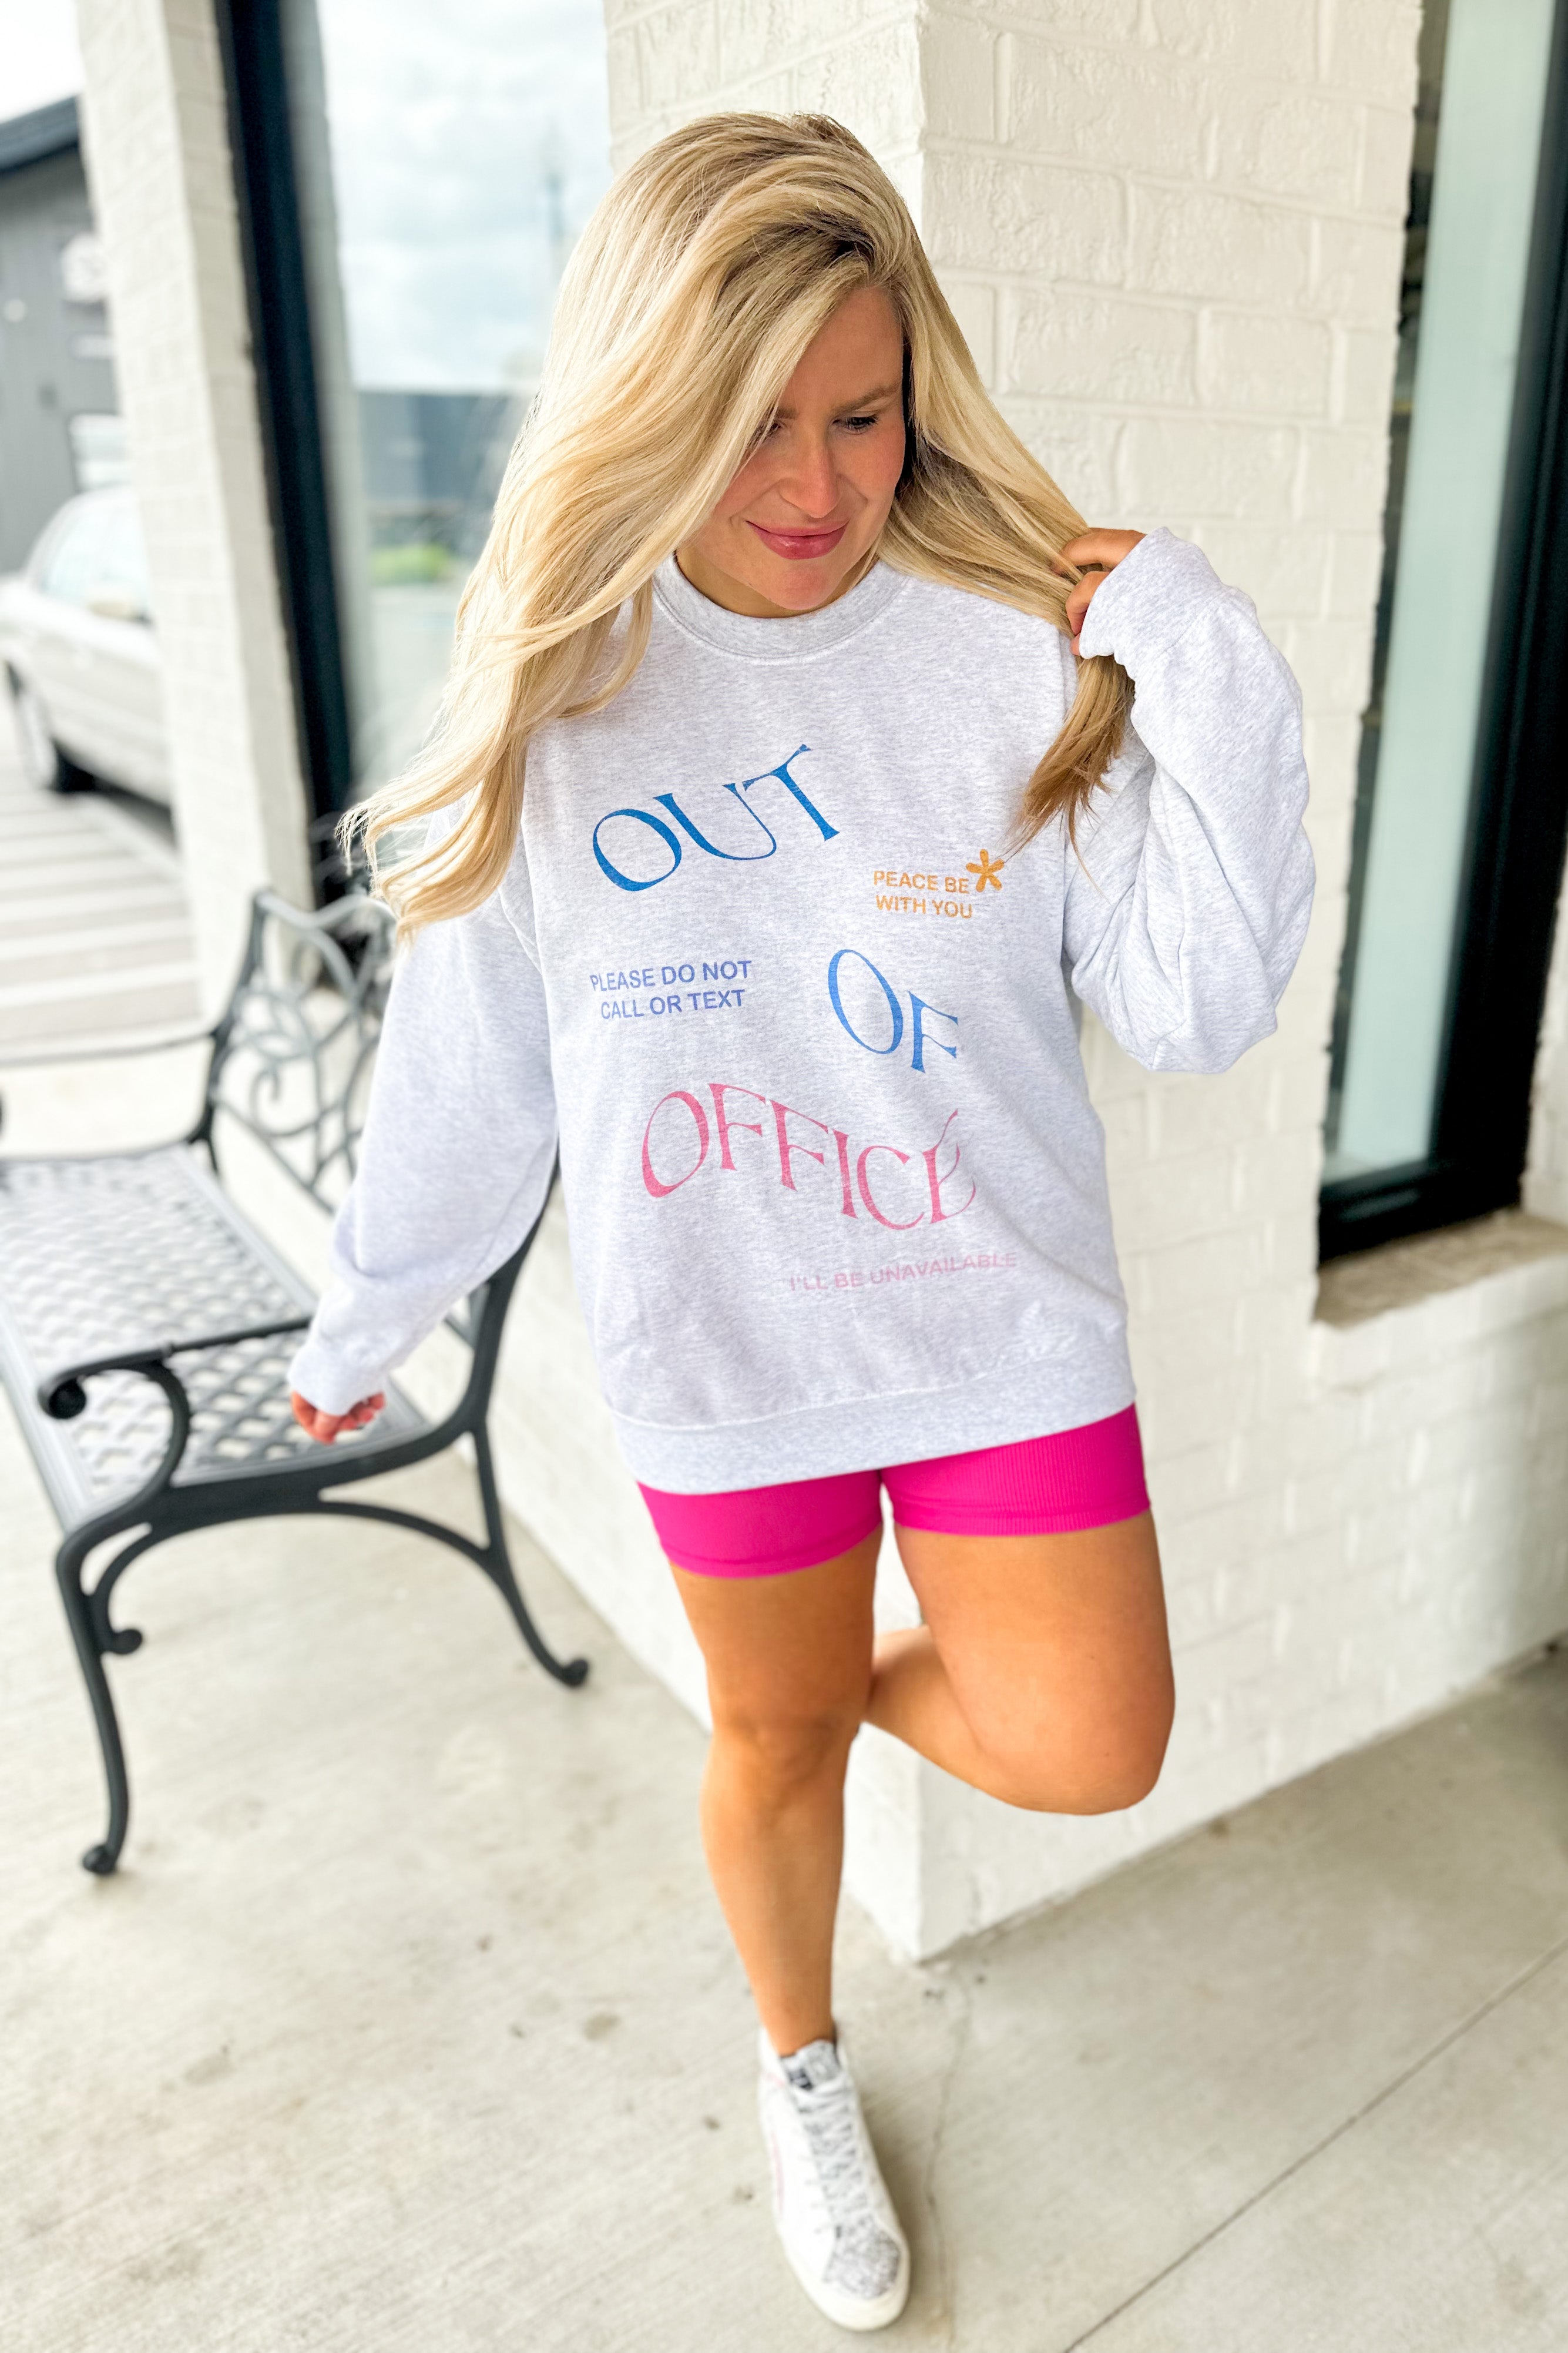 Out Of Office Graphic Long Sleeve Sweatshirt Top - Be You Boutique